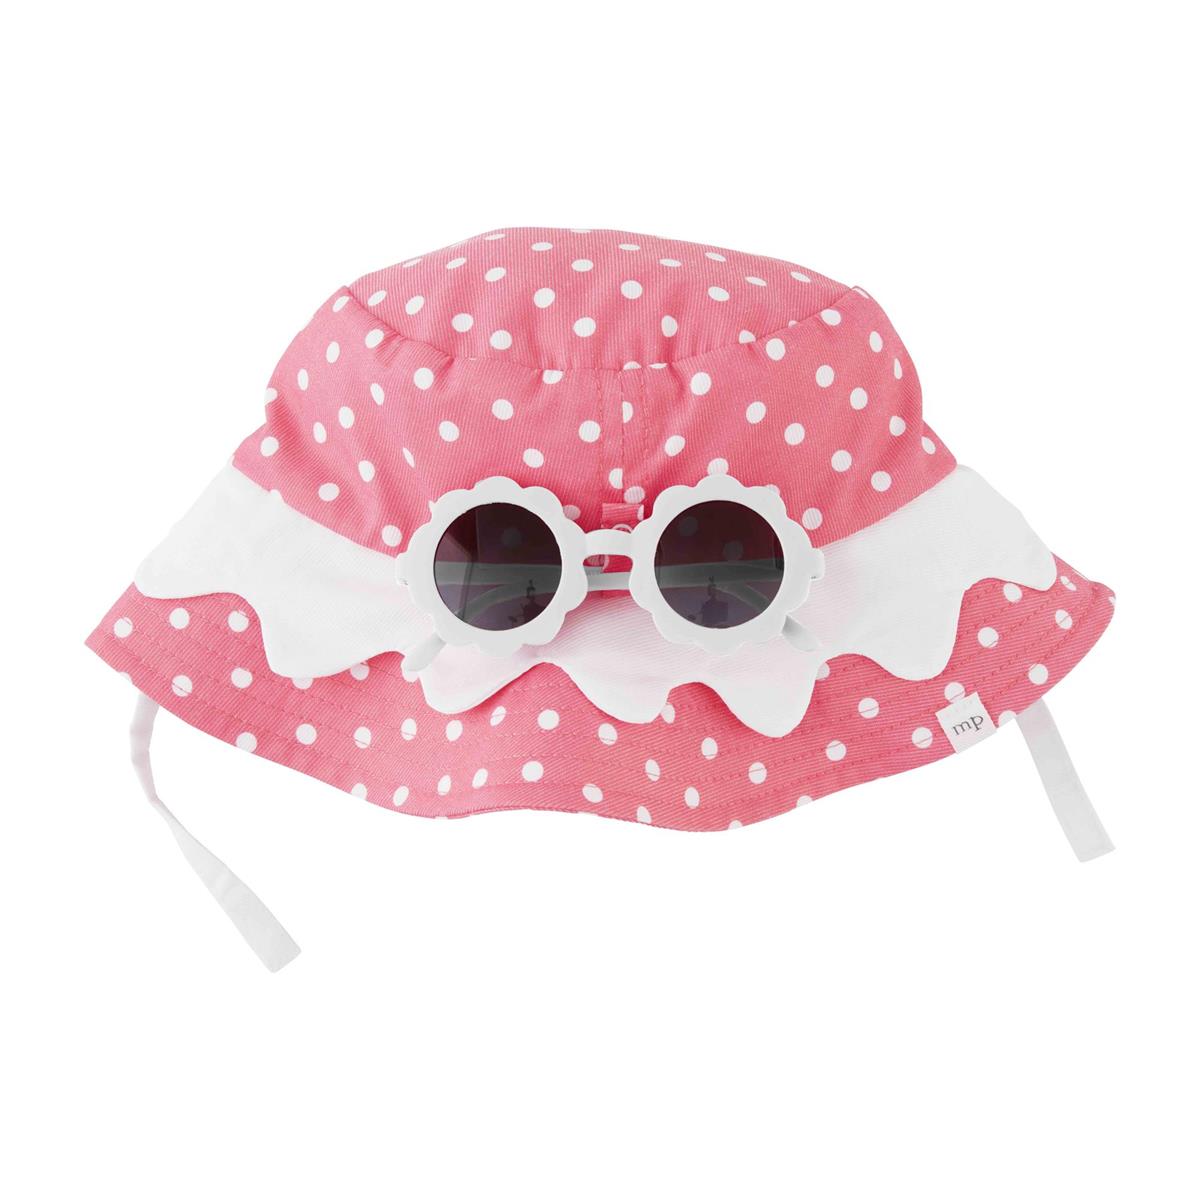 Mud Pie Pink Scallop Hat and Glasses